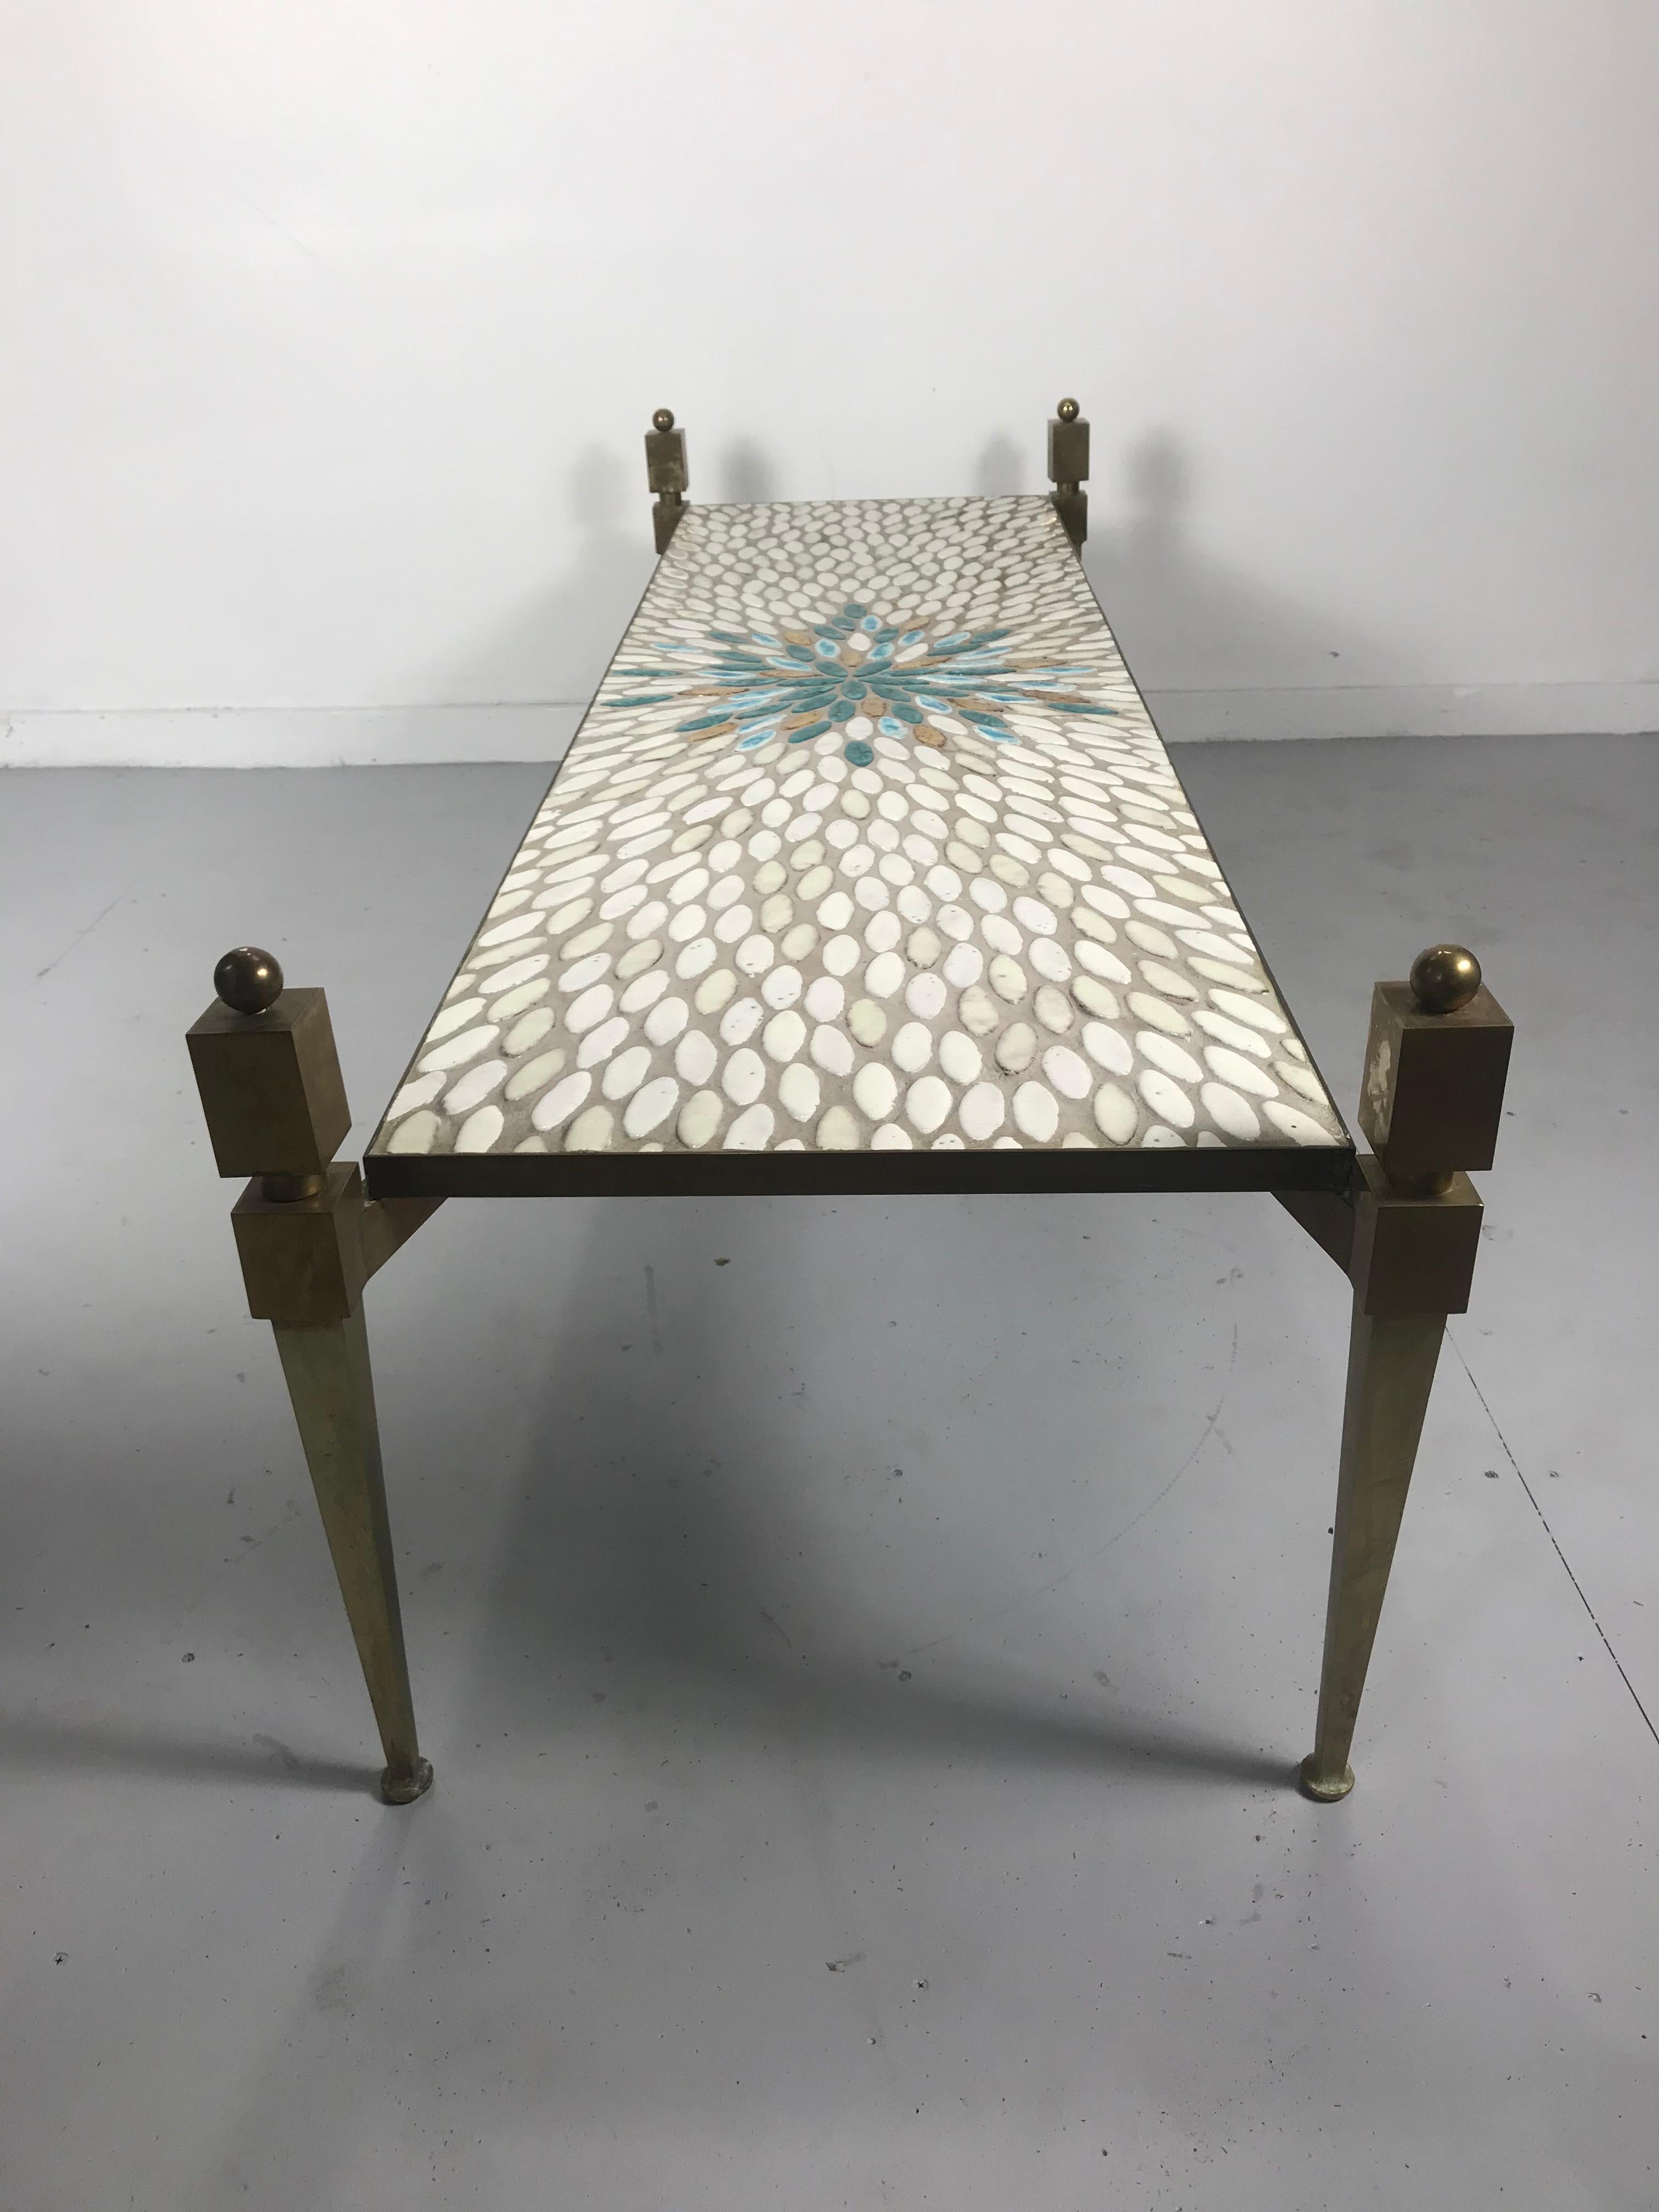 Stunning over the top, Italian brass and oval Mosiac tile coffee or cocktail table, Amazing quality and construction, Large egg shape mosaic tiles in blues, turquois and gold leaf, monumental brass finials, Photos do no justice, Hand delivery avail